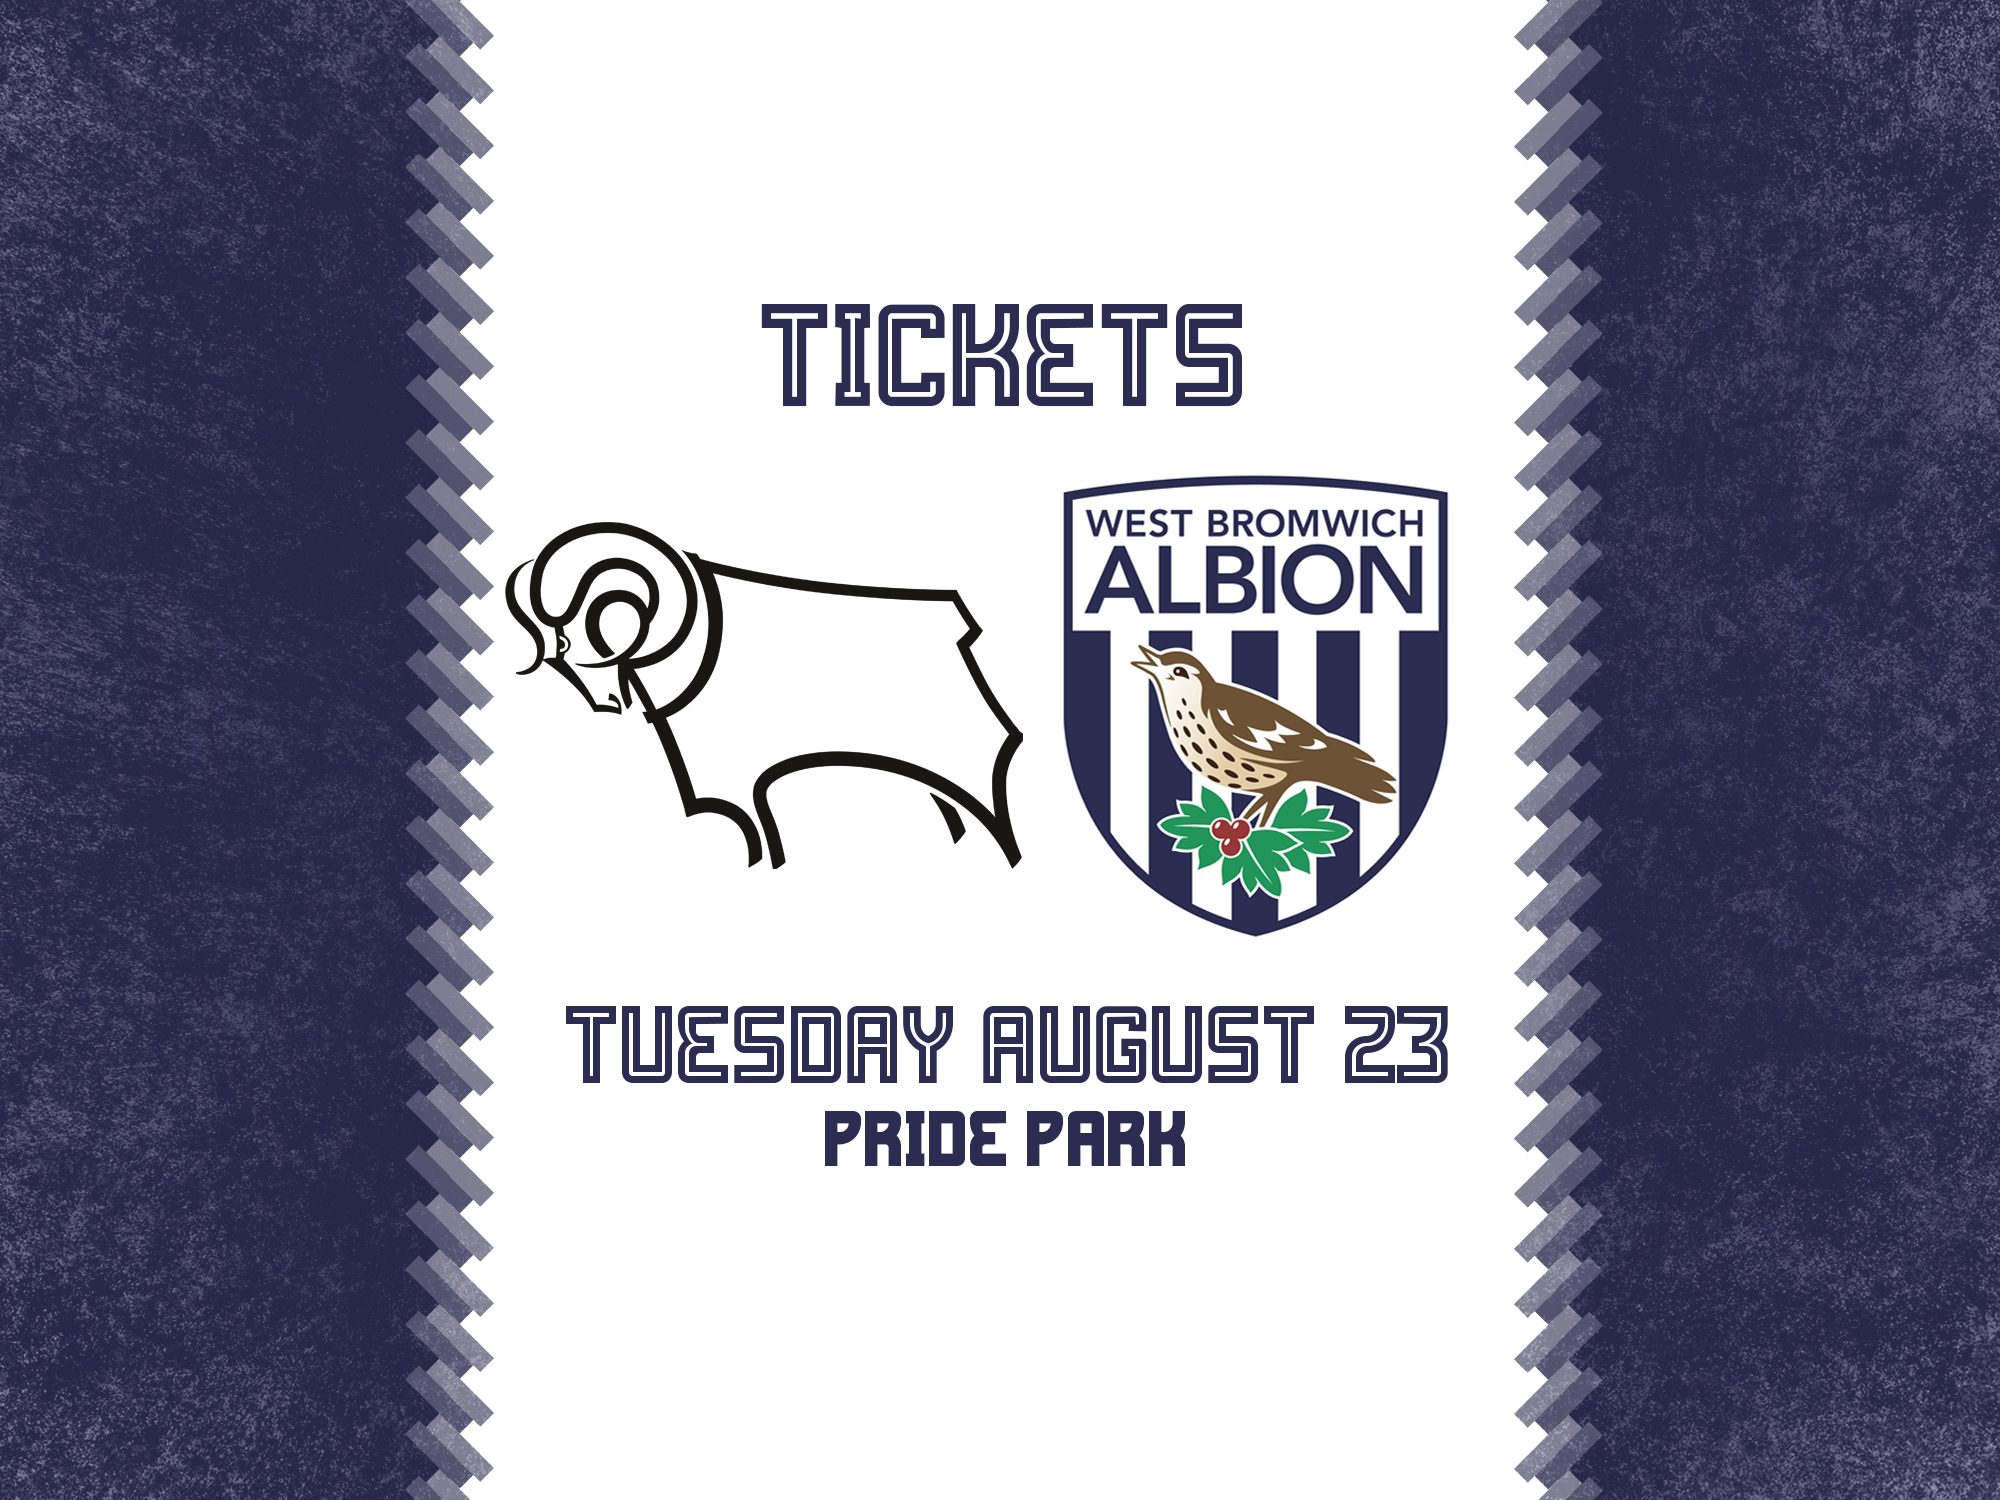 Tickets are now on sale for Albion's trip to Derby County